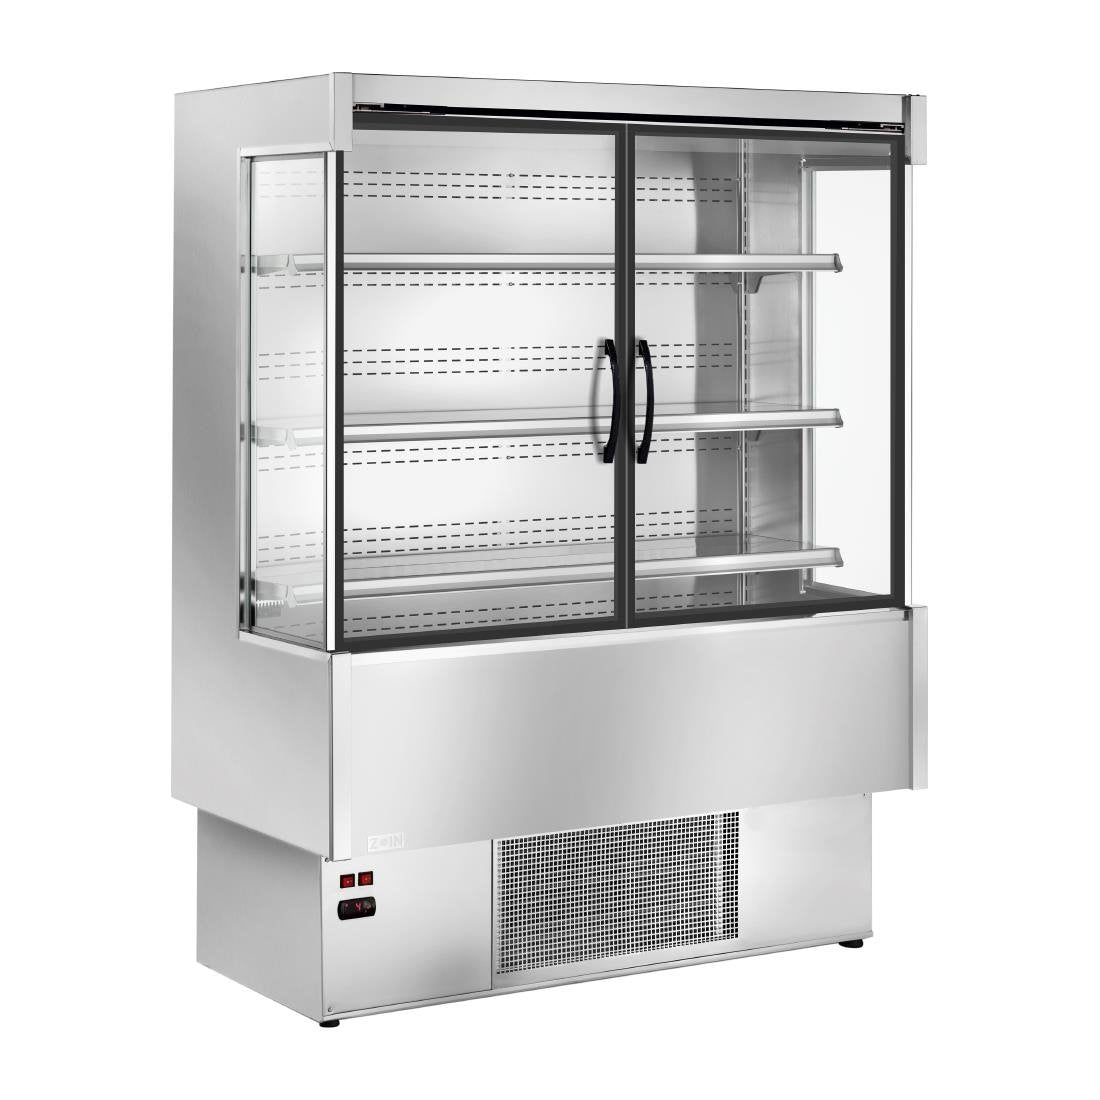 UA057-120 Zoin Silver Multideck Display Stainless Steel Finish with Hinged Doors 1500mm